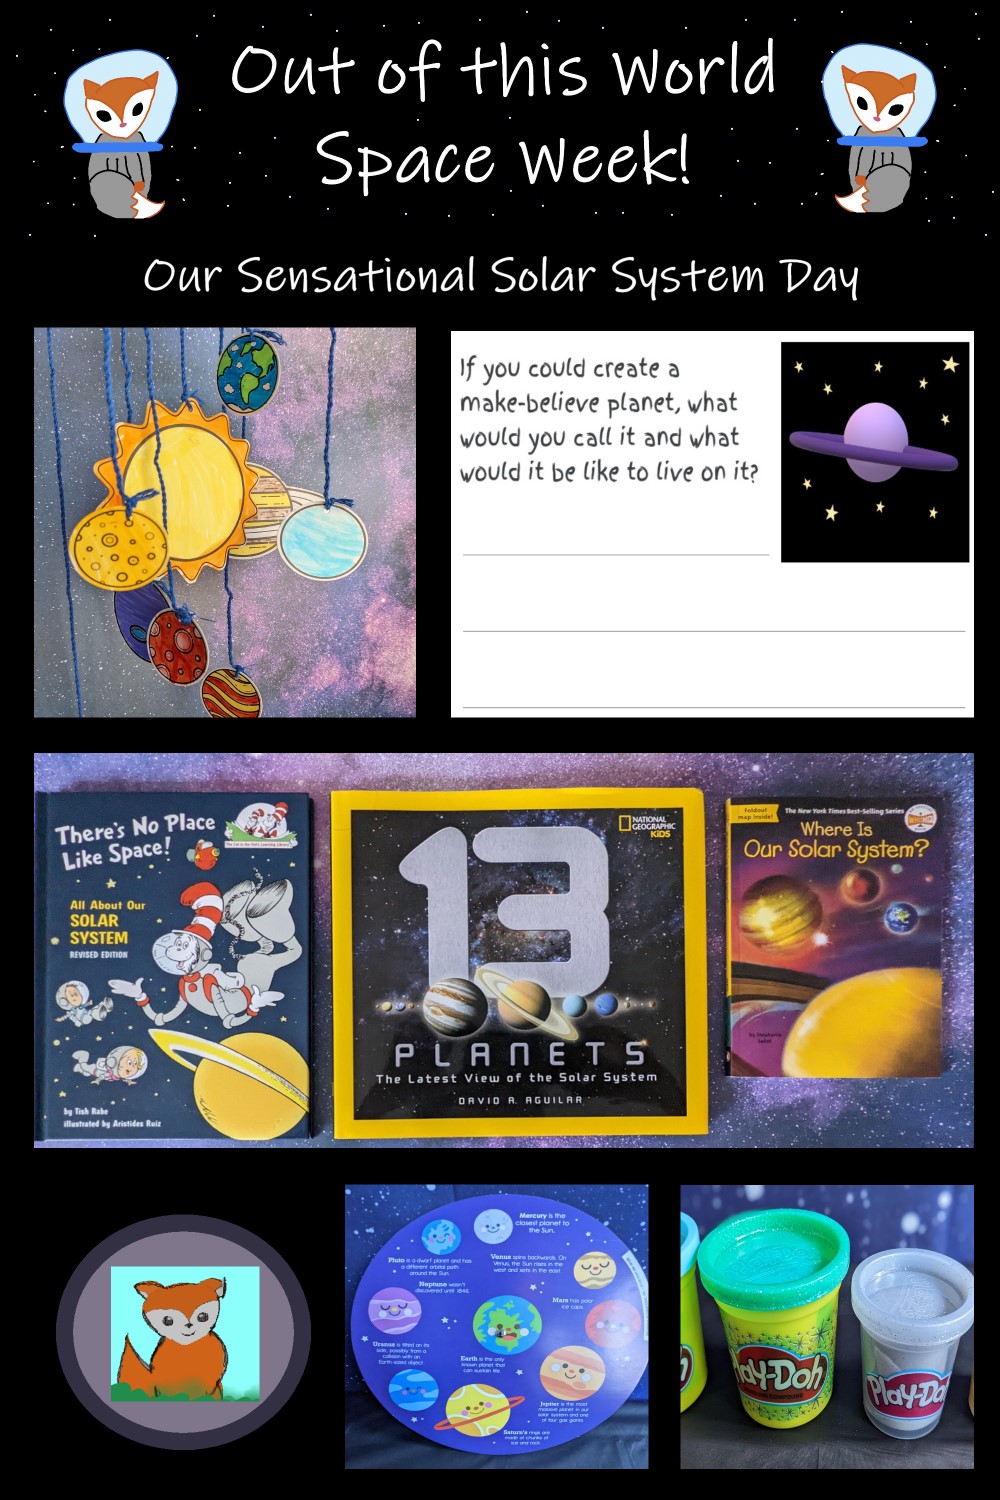 An Outstanding Out of this World Space Week – Our Sensational Solar System